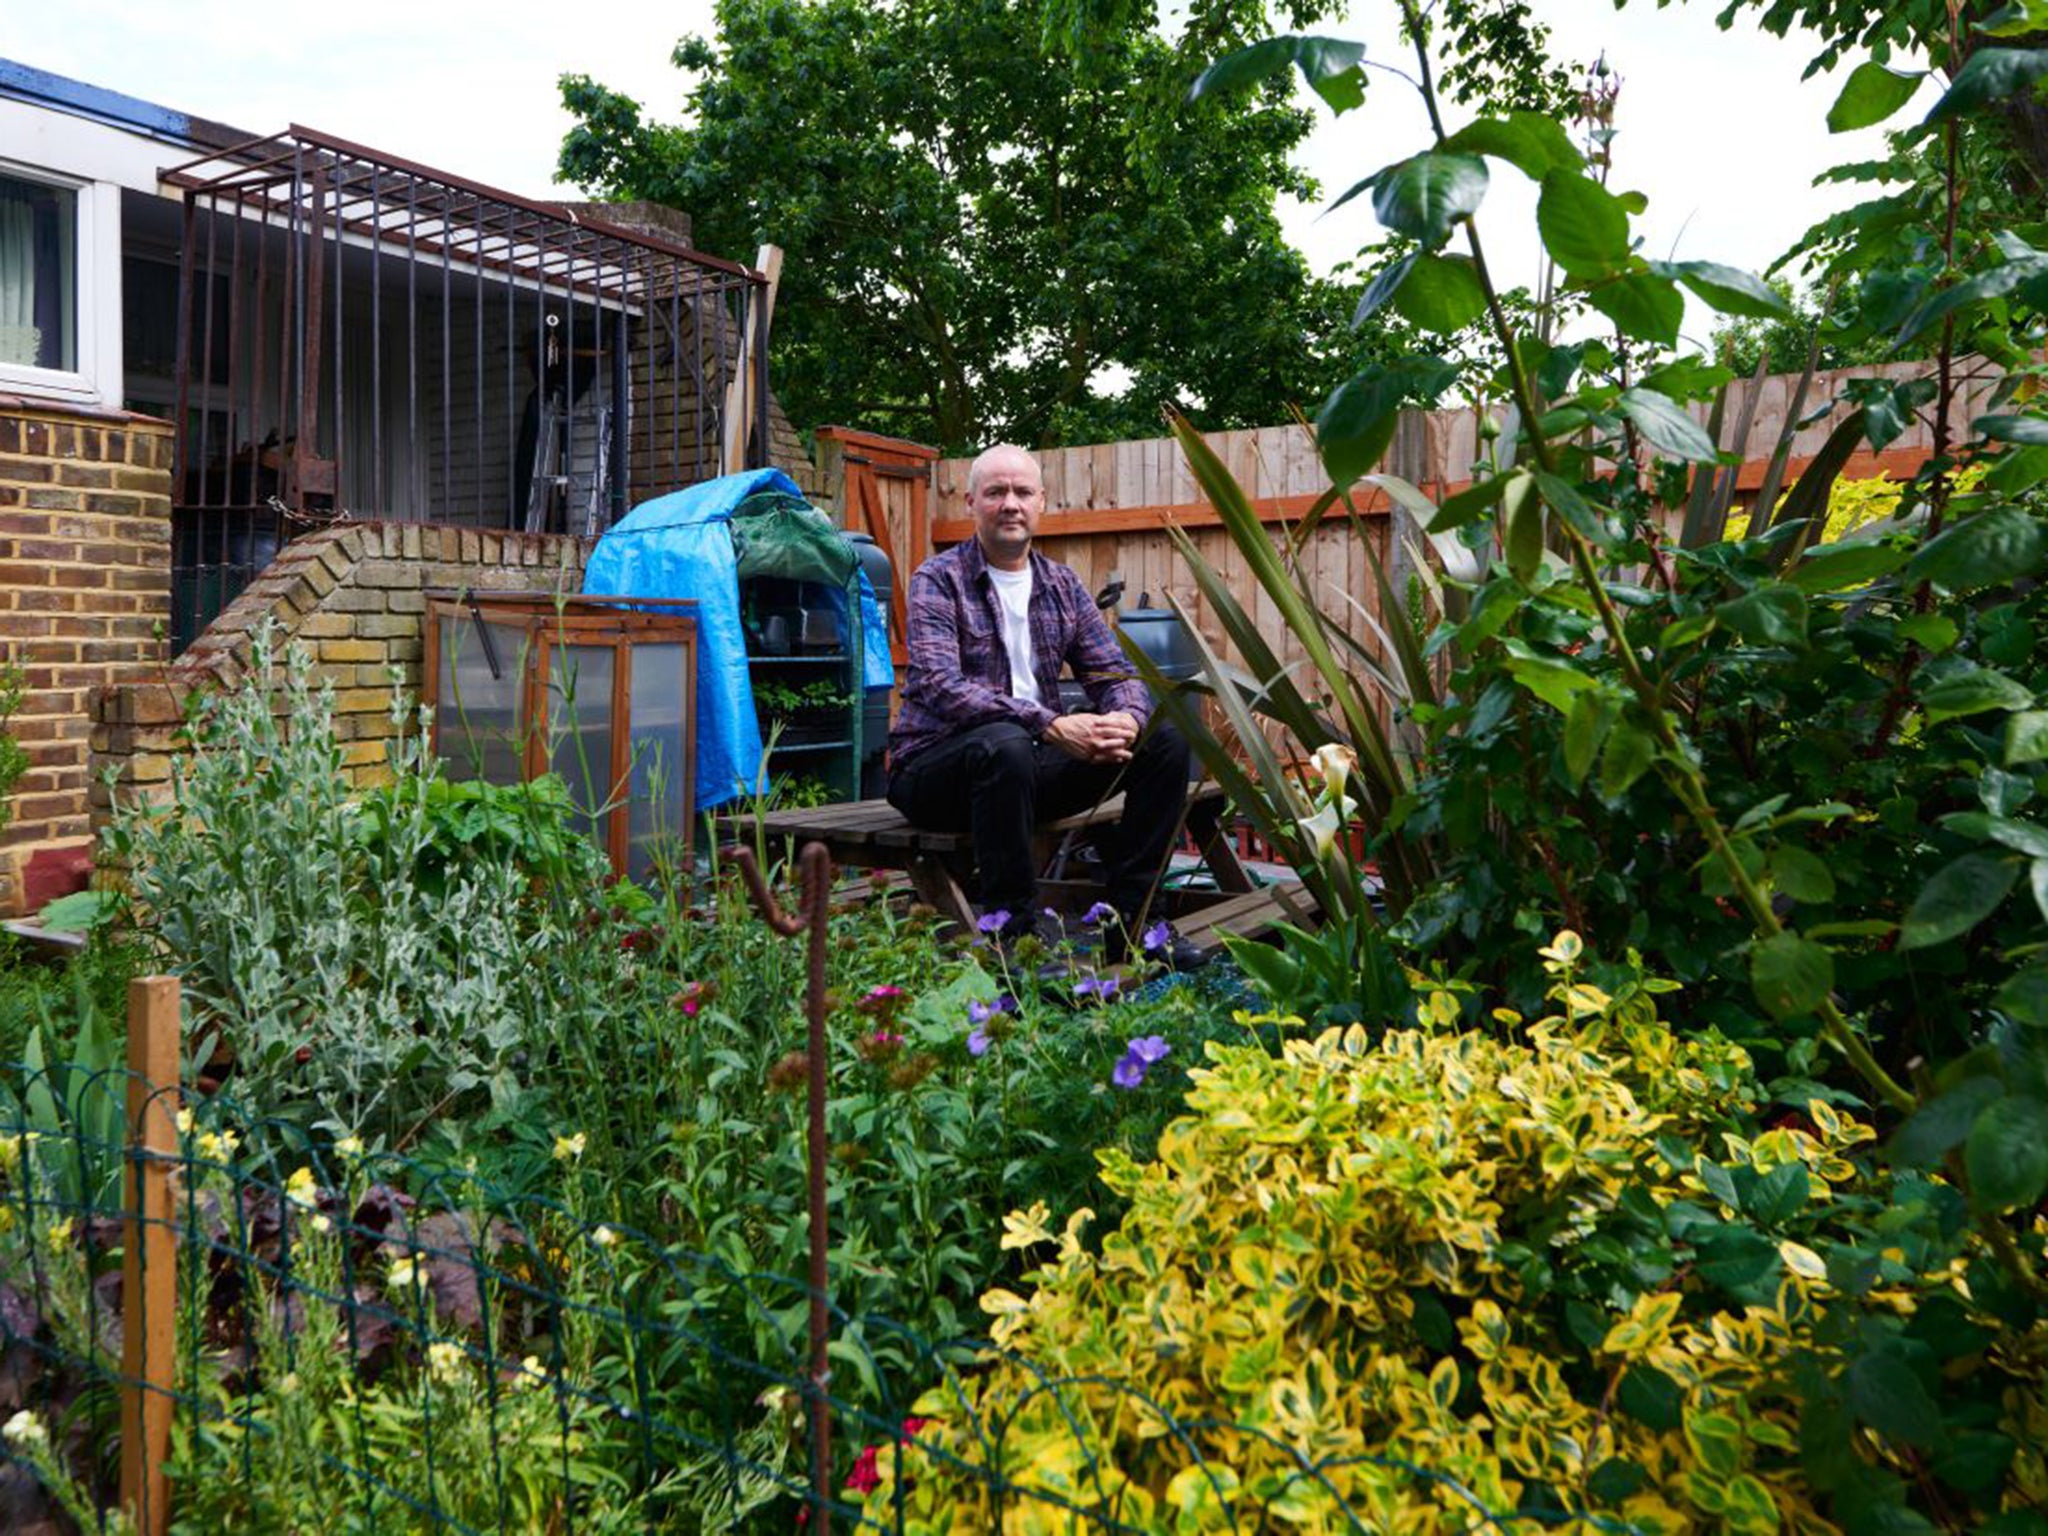 Nicholas Greaves in the Cressingham Gardens he tends